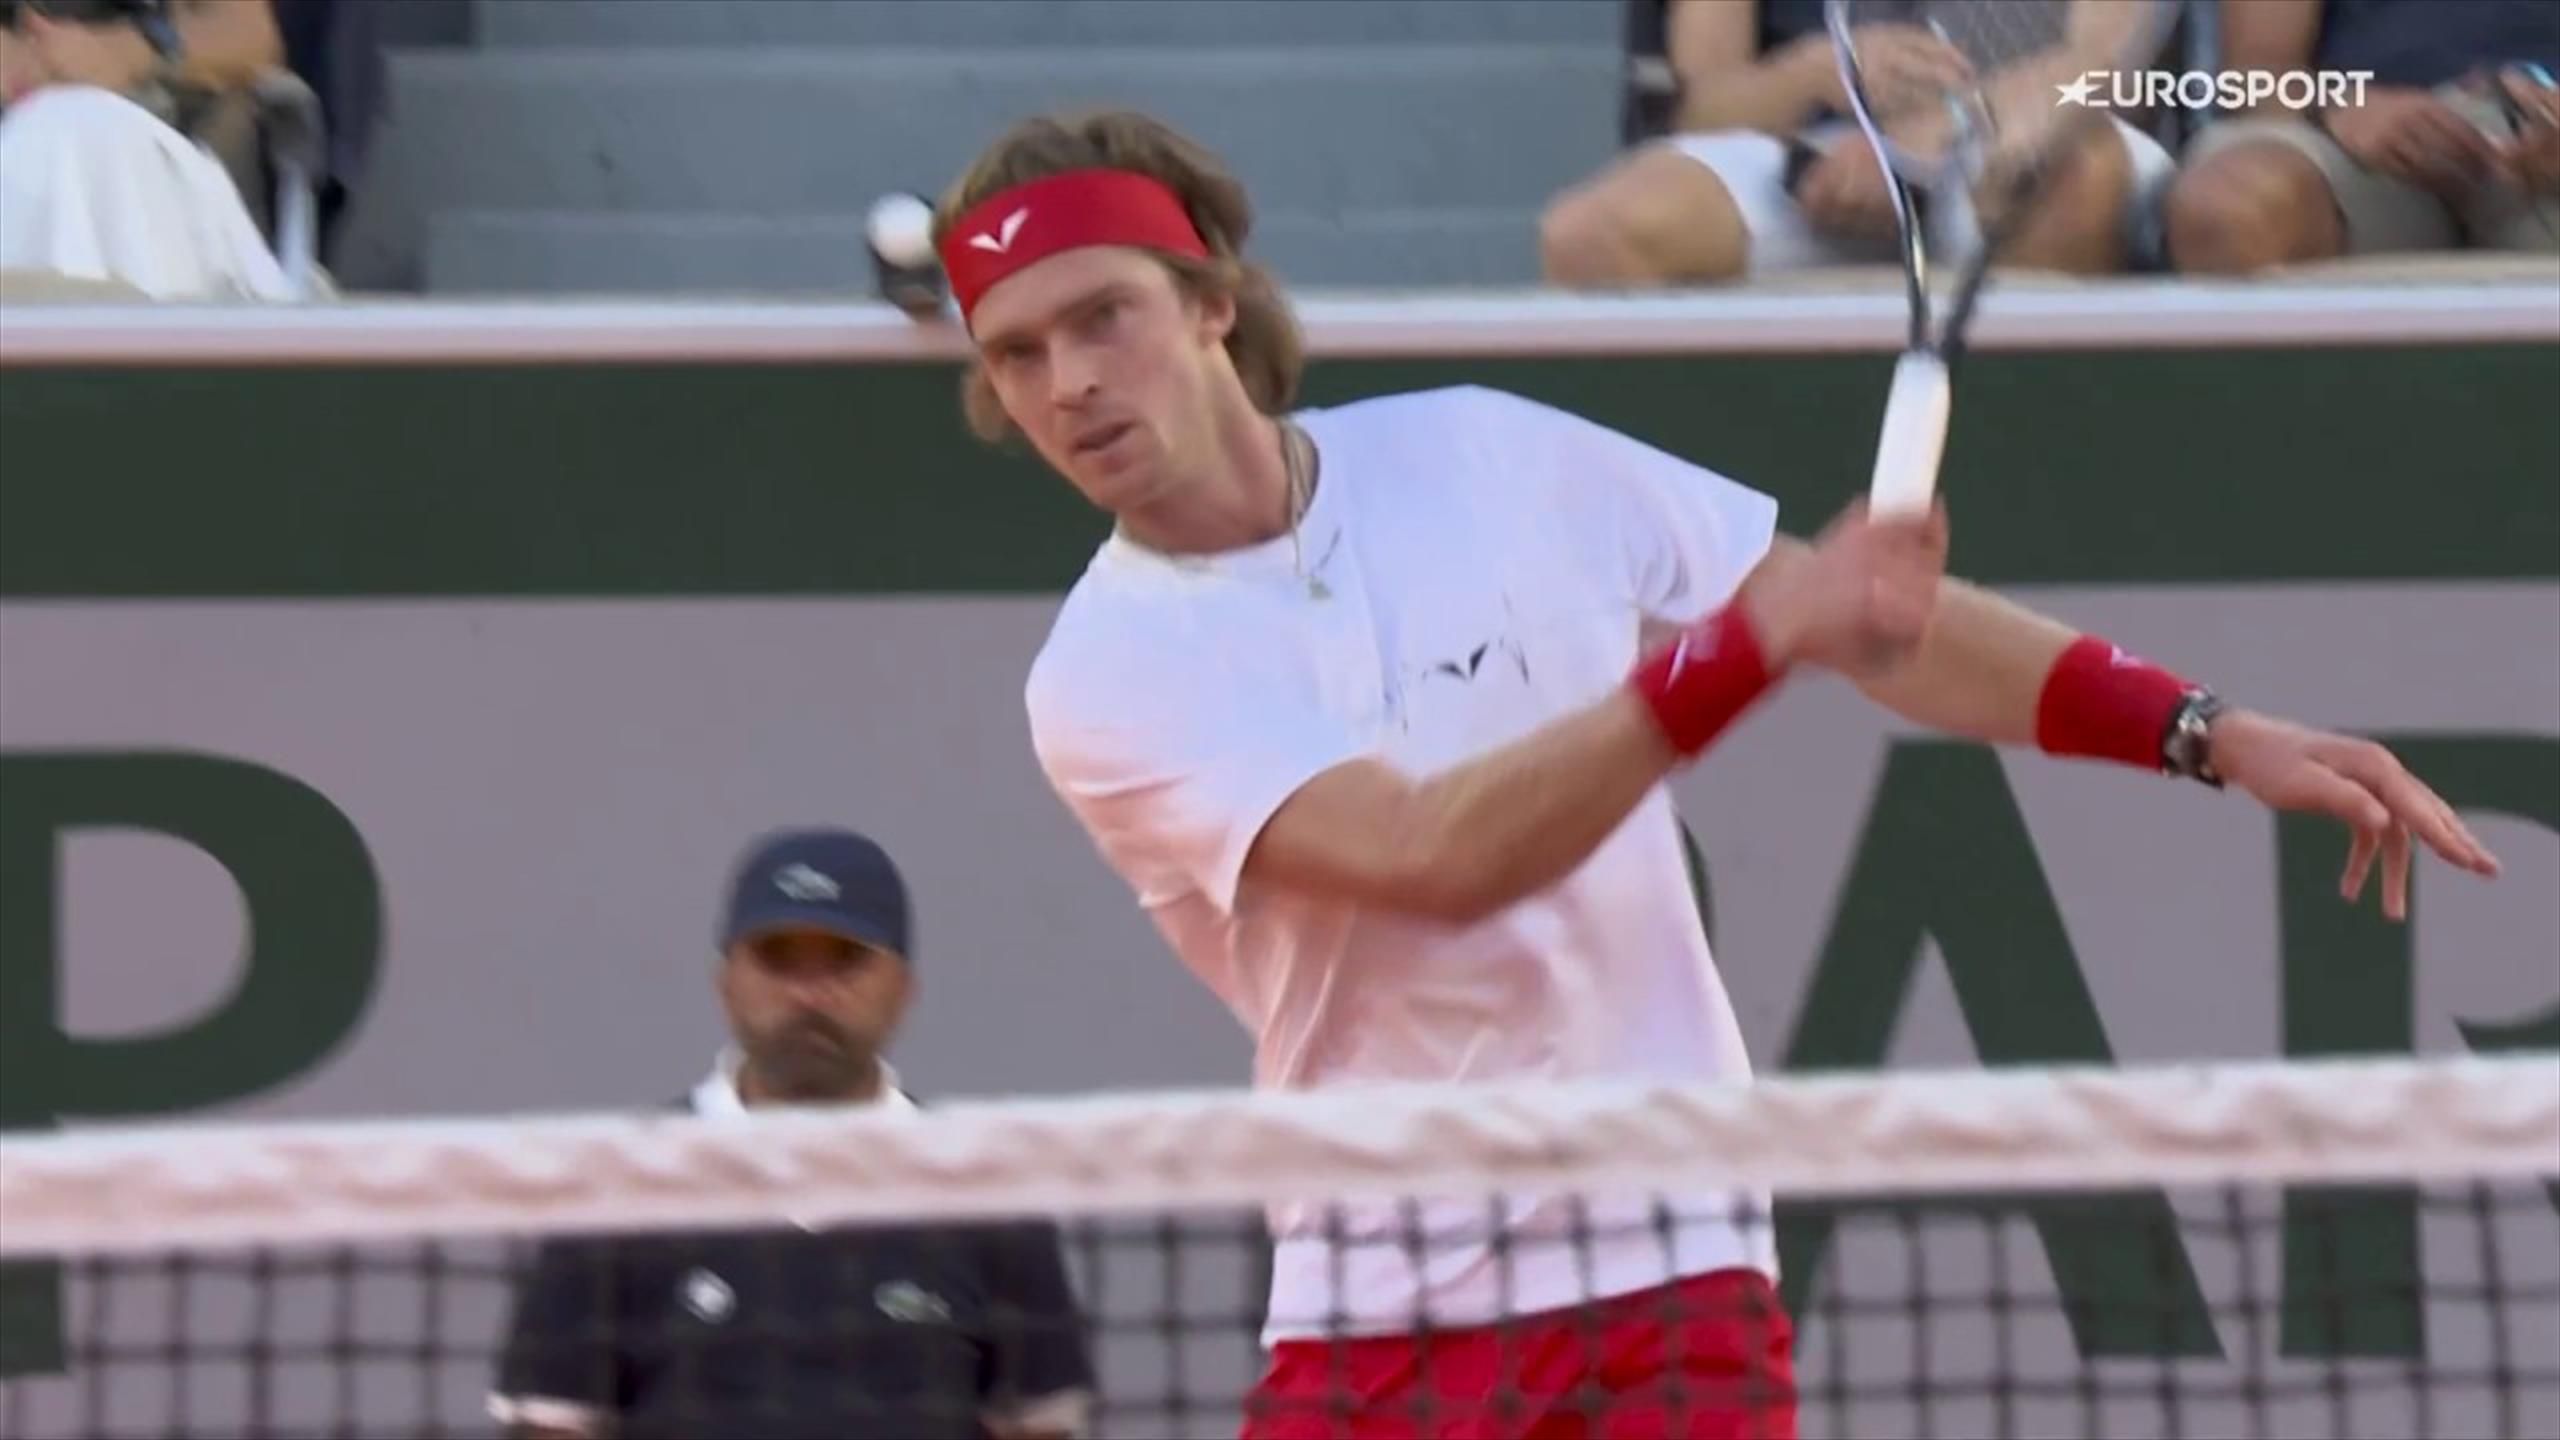 French Open 2023 Andrey Rublev NOT happy as he blasts ball away in frustration after losing set - Tennis video